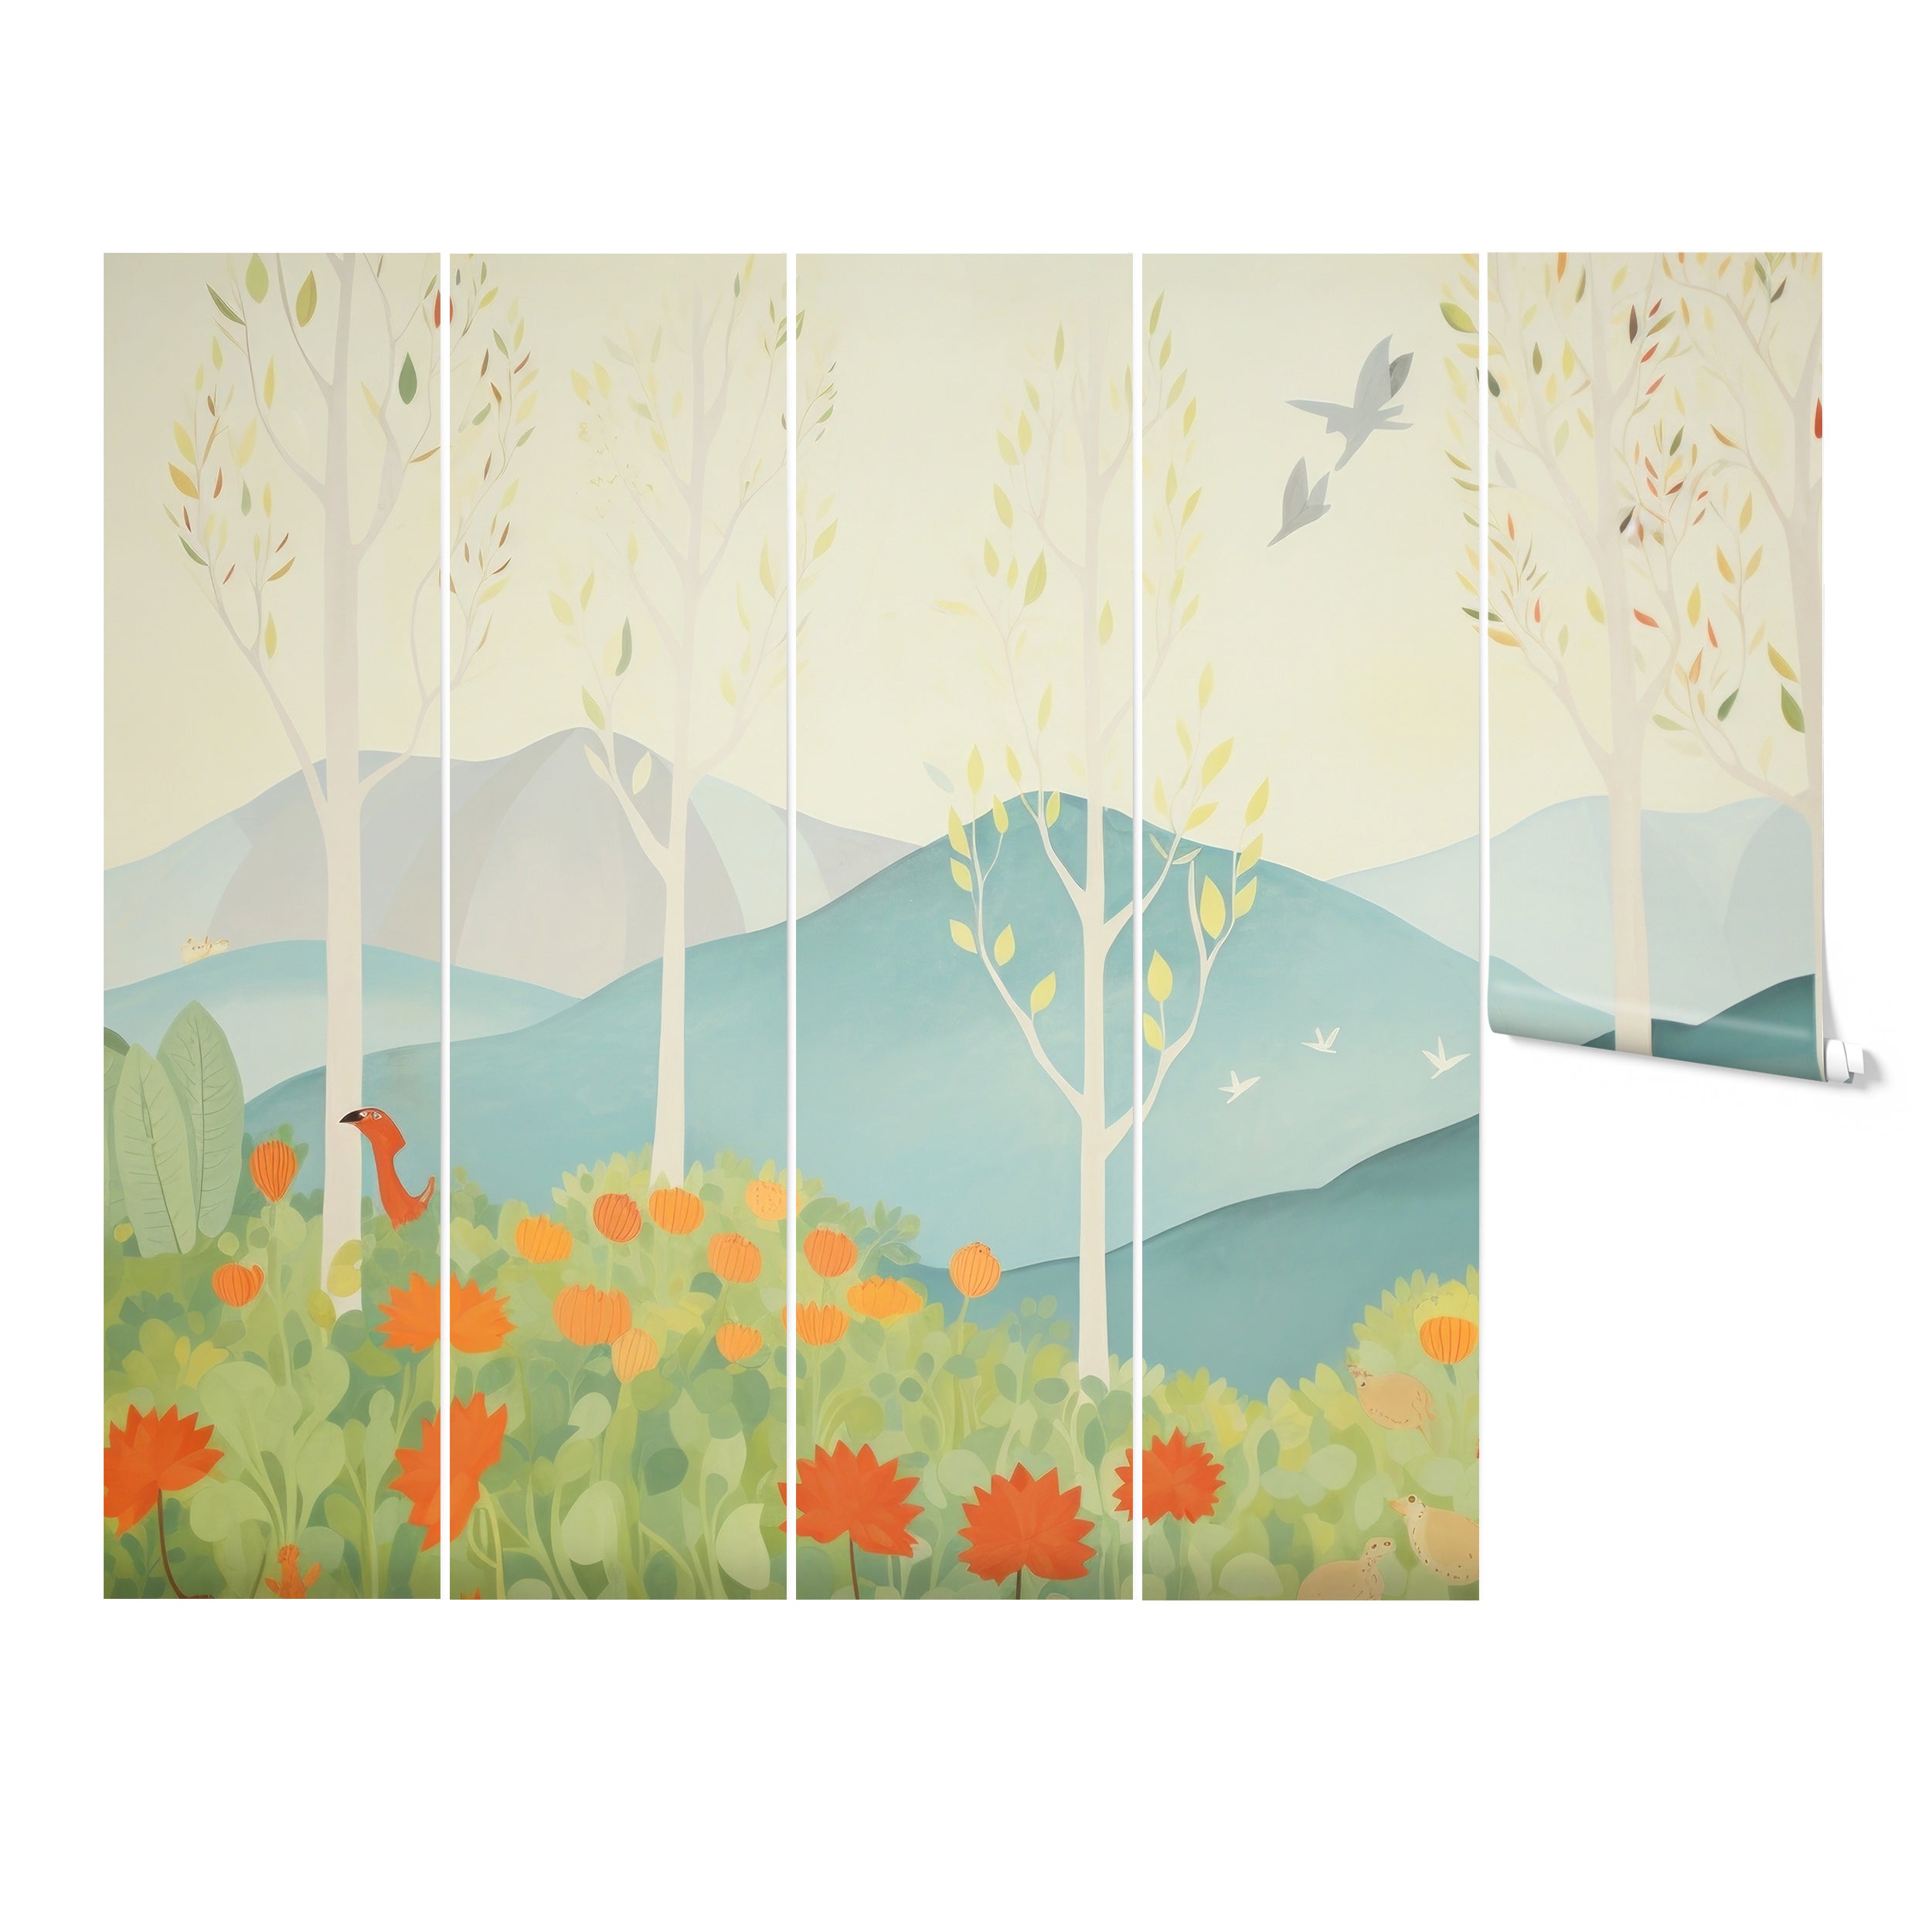 "Blue Mountain wallpaper mural with serene mountain landscape and elegant trees."